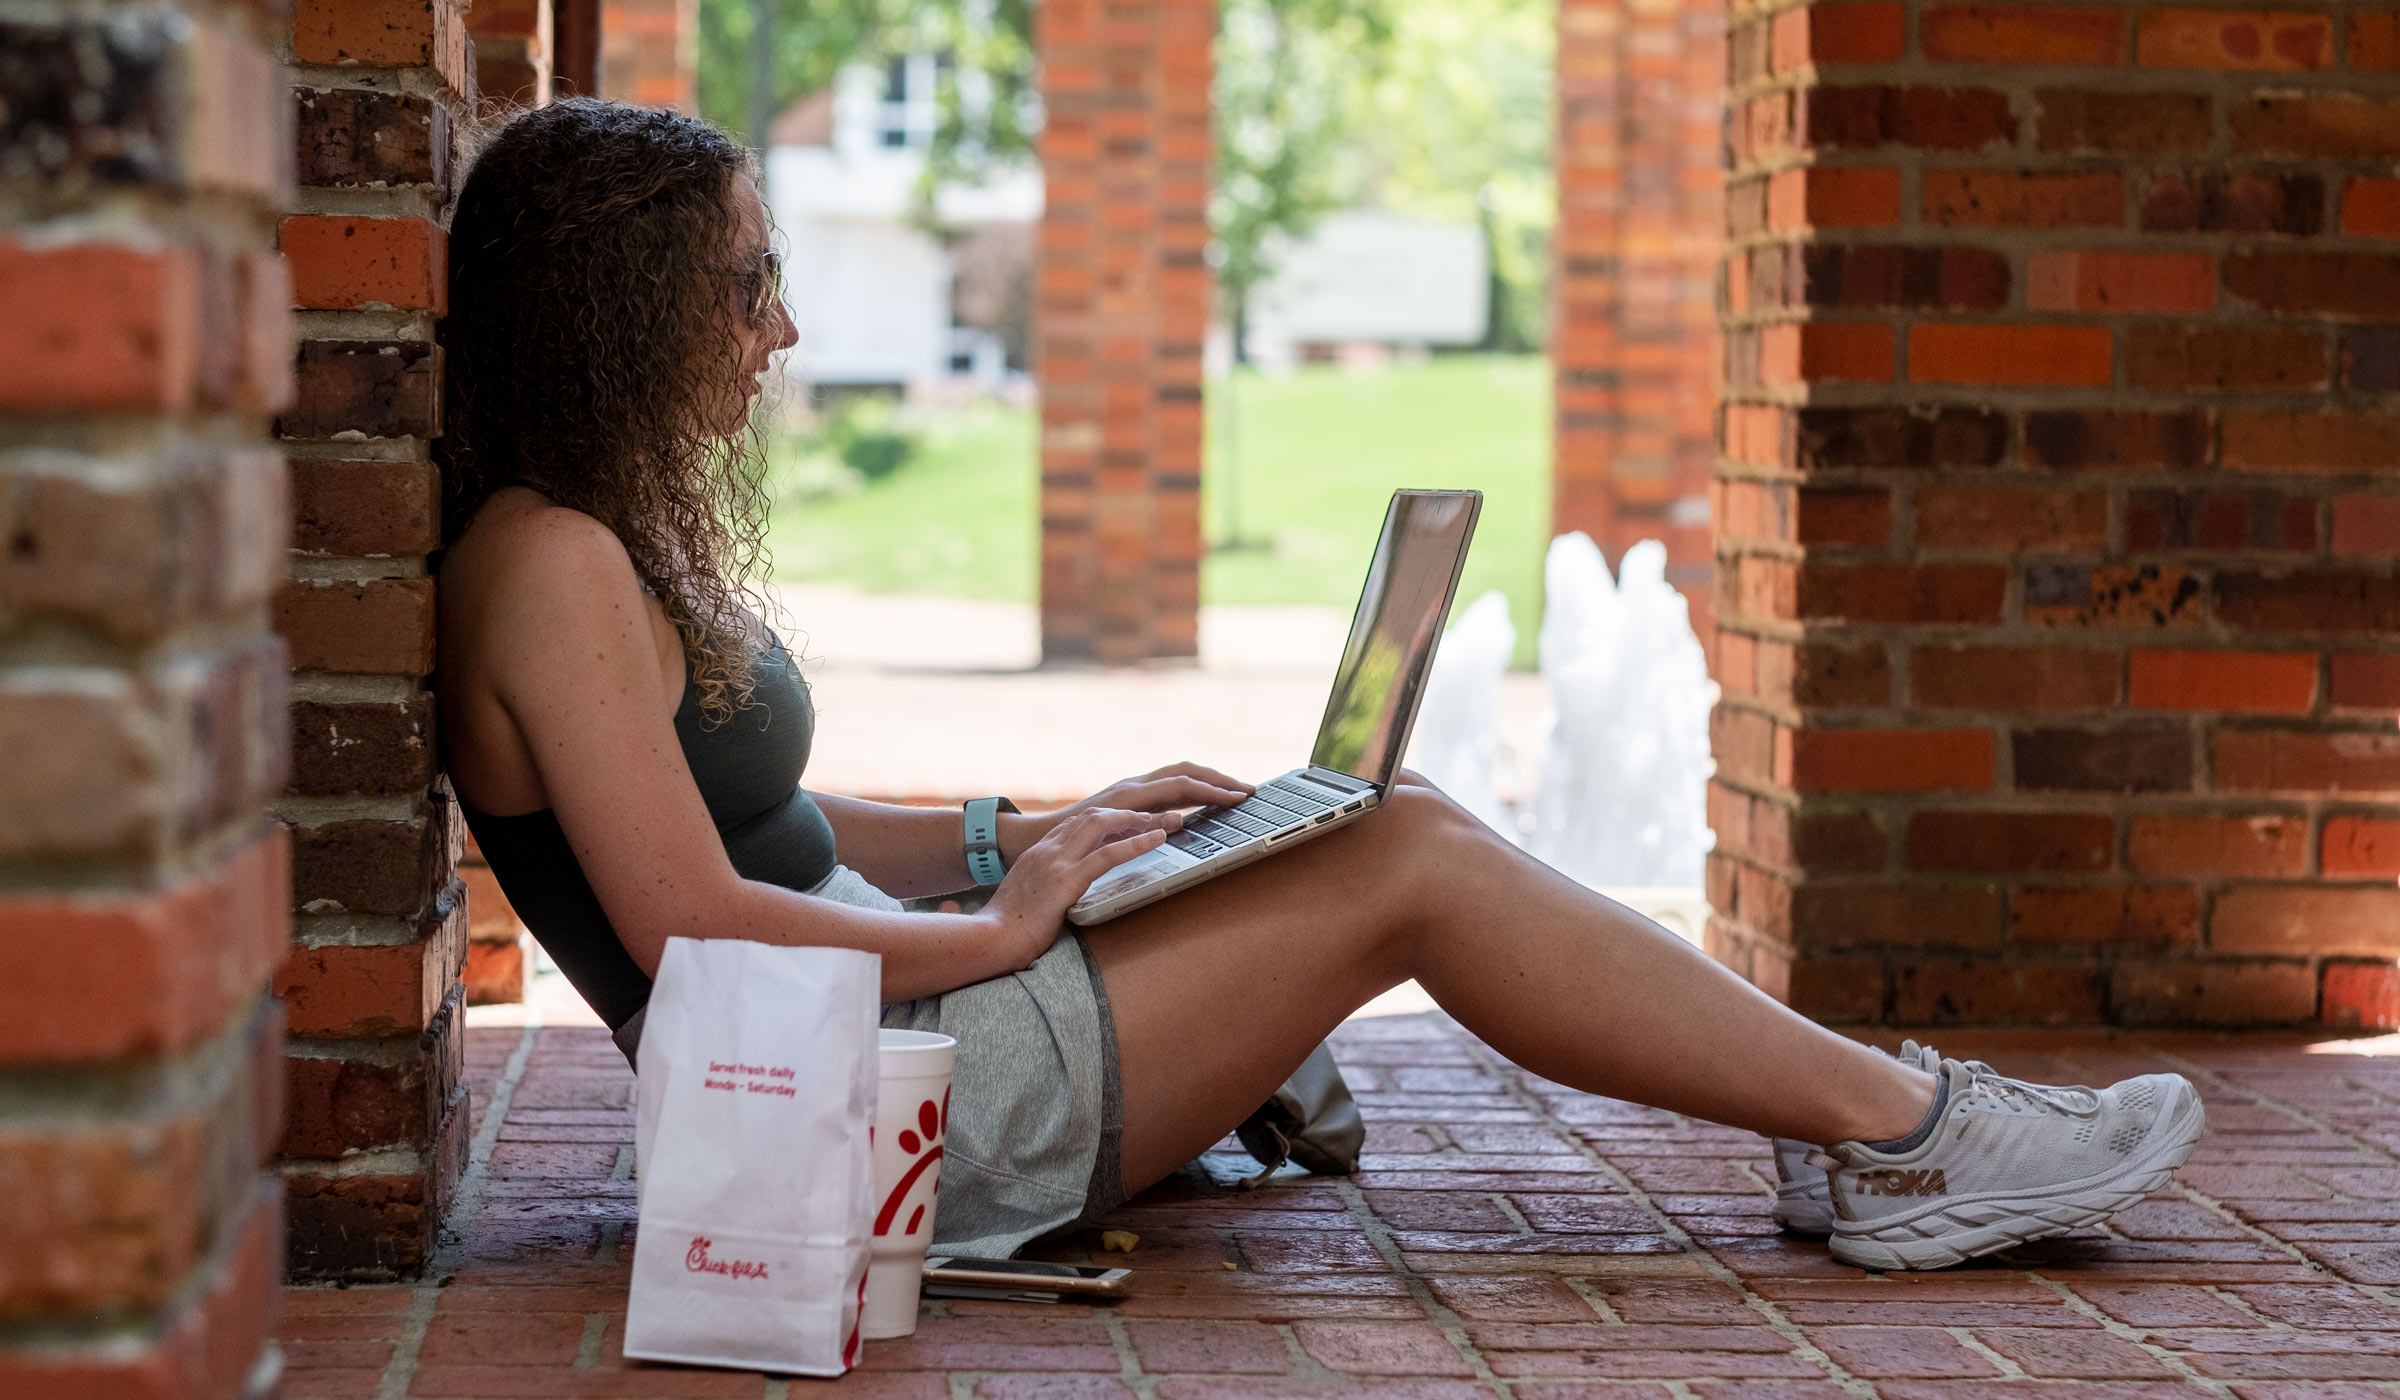 Elementary Education major Alex Mogenson readies to stream her summer class by the Chapel fountain.